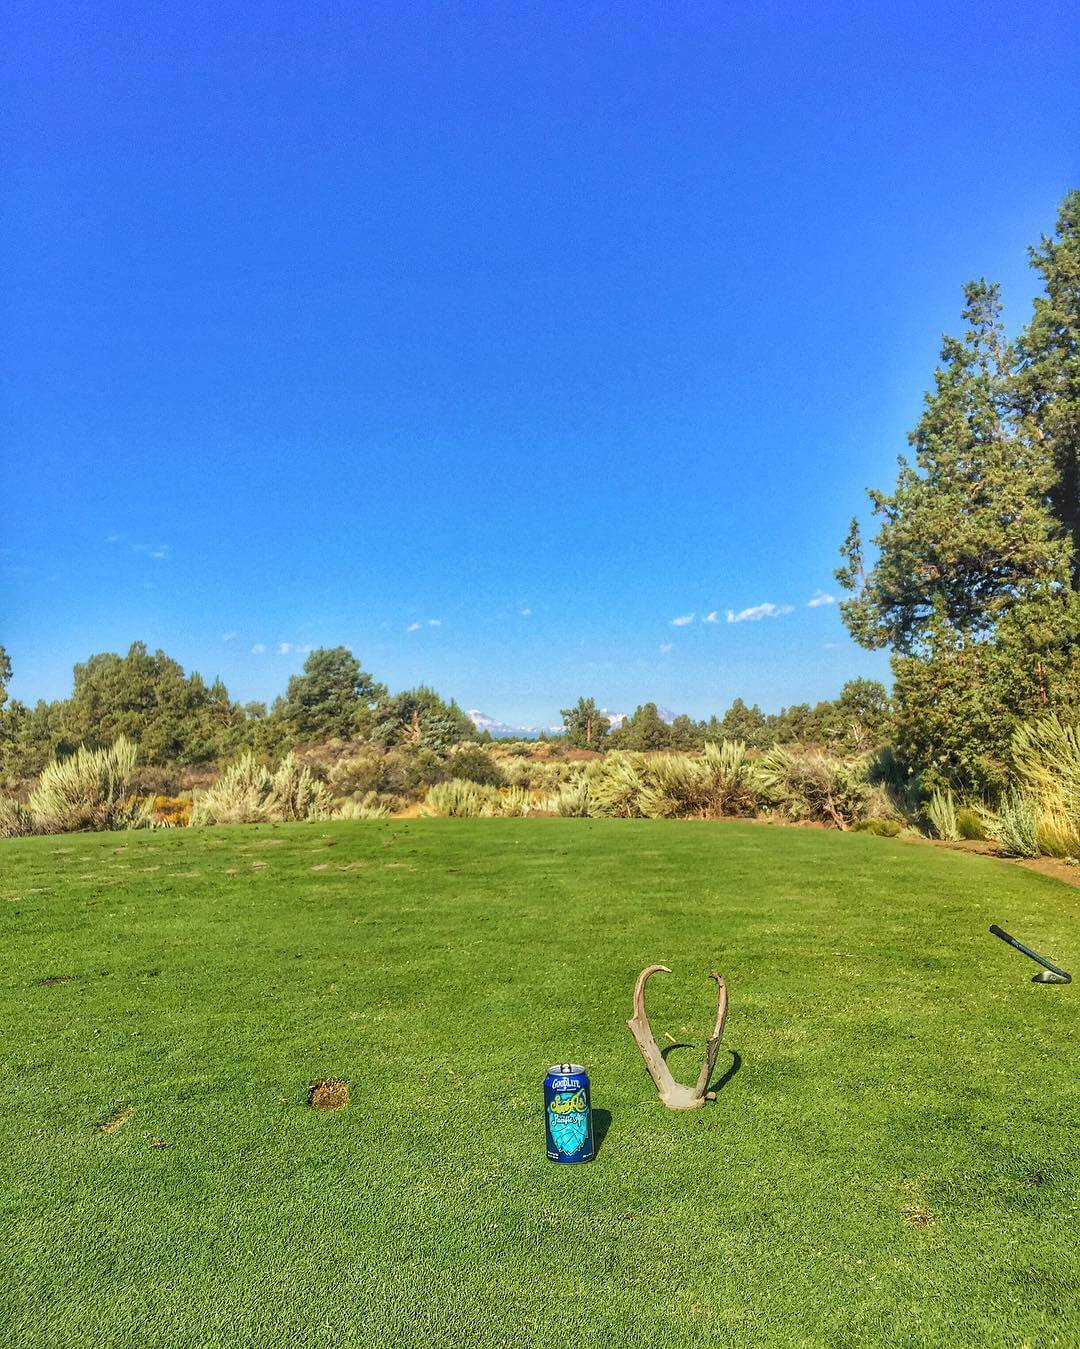 Buenos Dias from the Ghost Tree Invitational at #pronghorn! #adventurousales #ishouldhaveyelledtwo